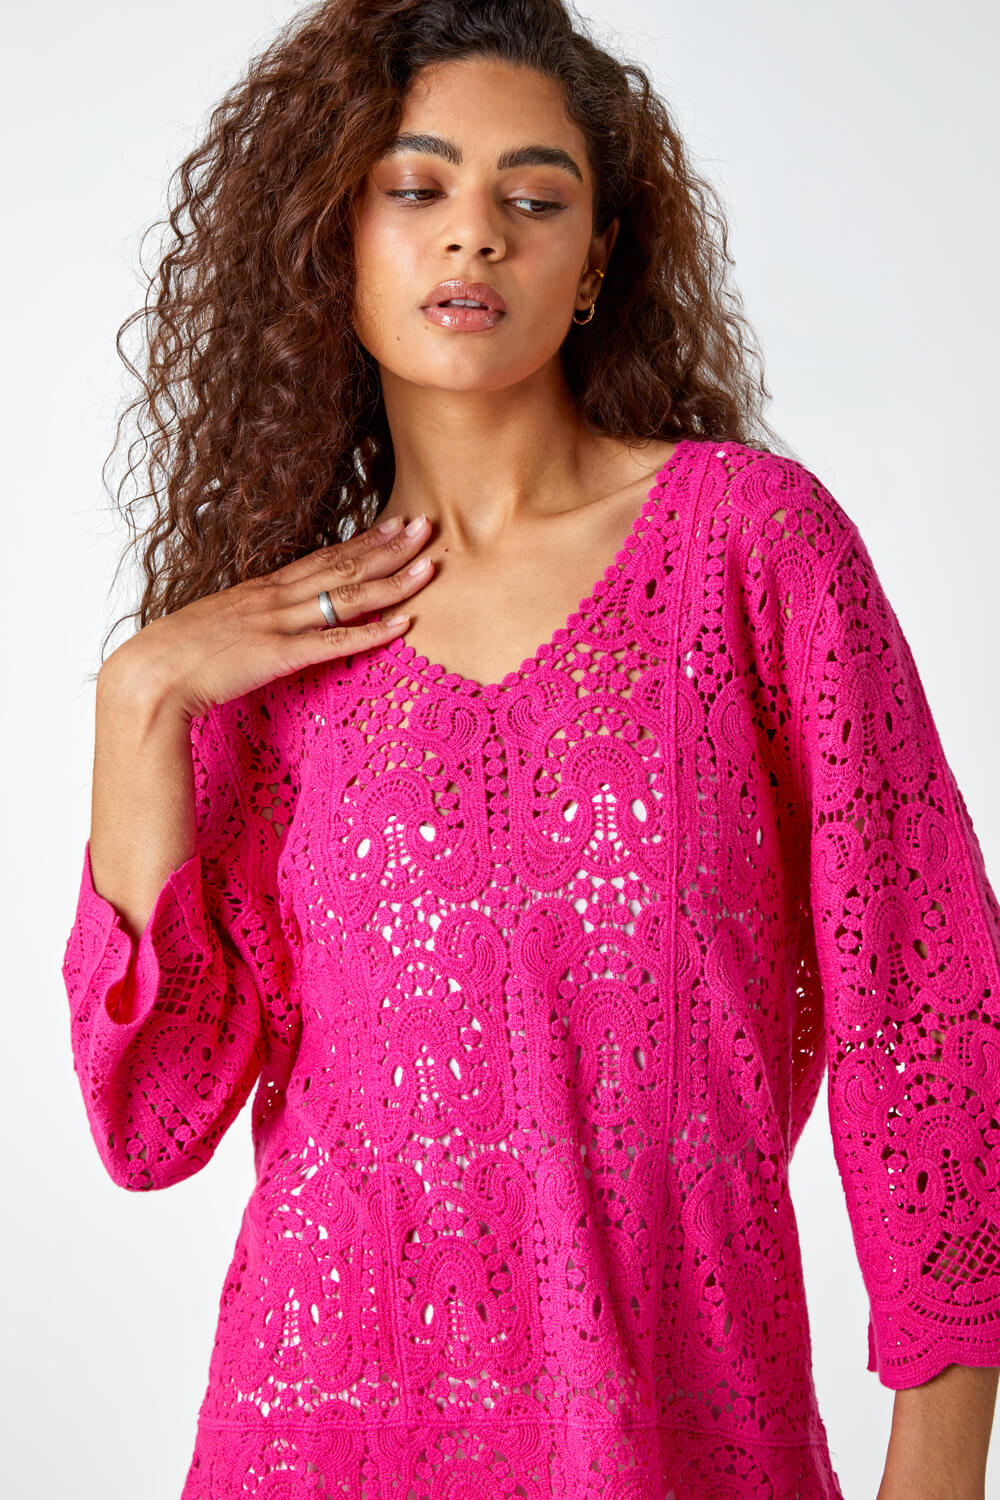 PINK Cotton Crochet Tunic Top, Image 4 of 5